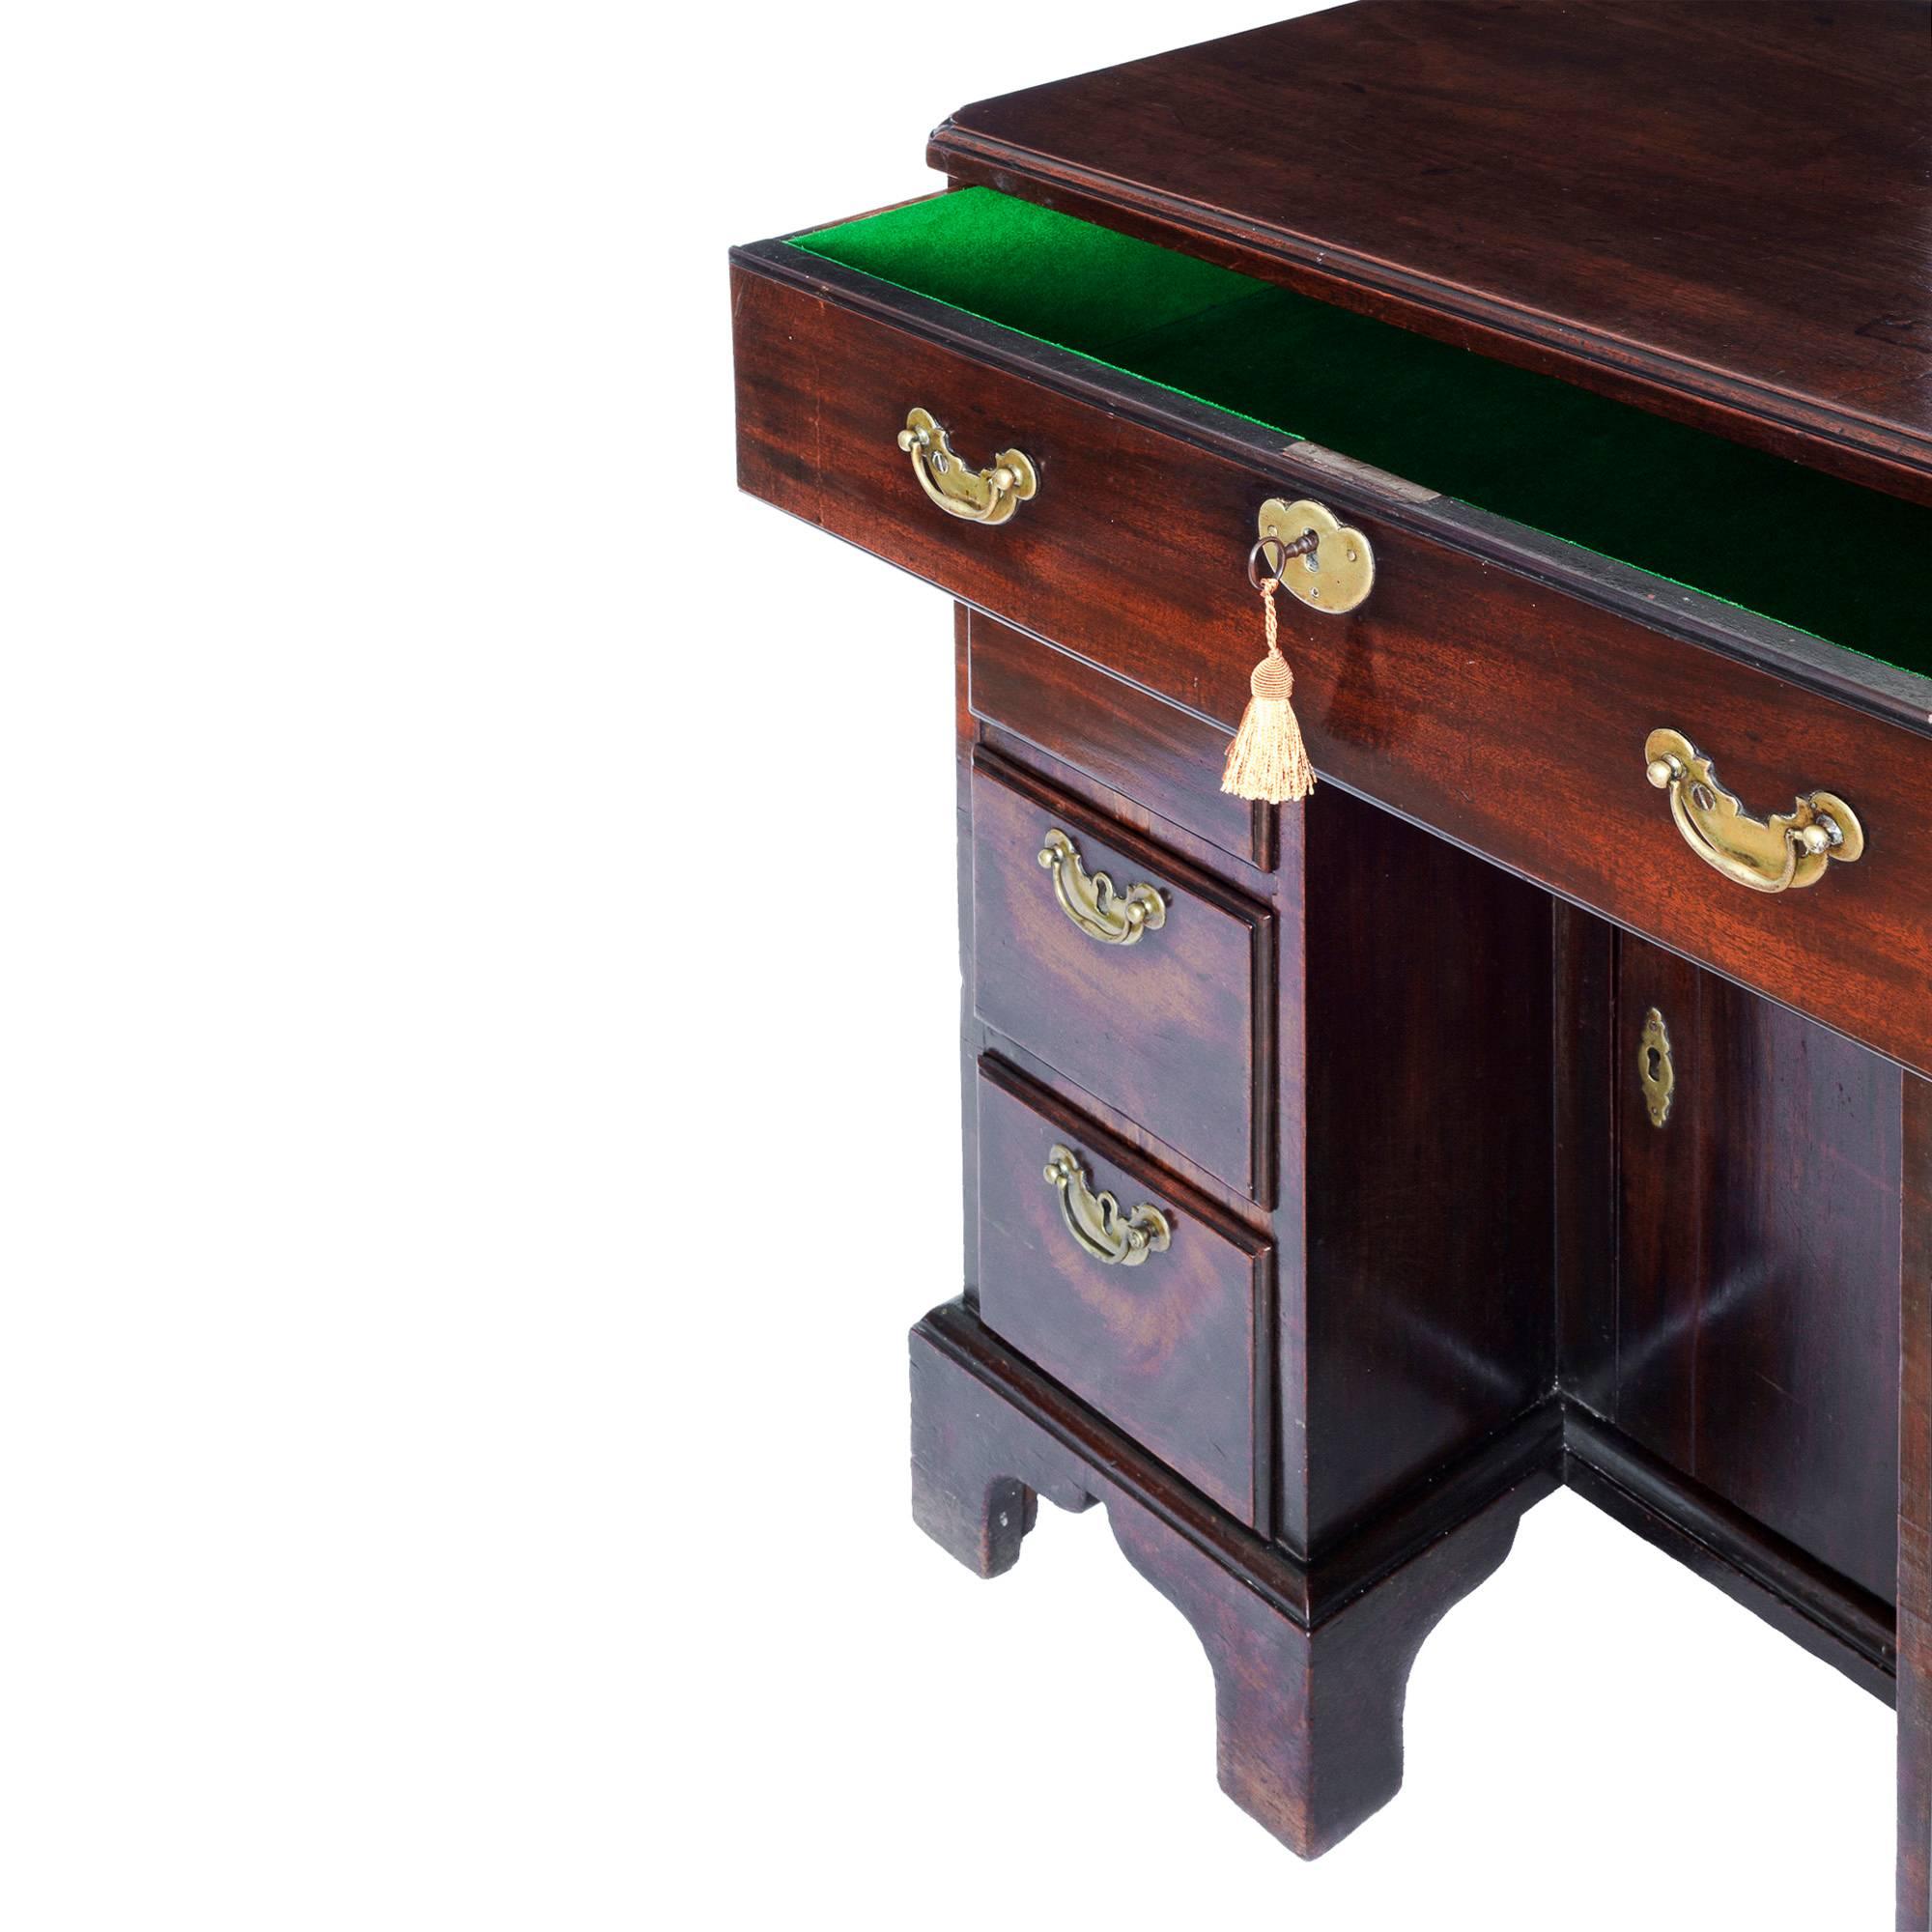 A fine mid-18th century George II period cuban mahogany kneehole desk of diminutive proportions in remarkably original condition, original surfaces, superb colour and patination.

English, circa 1750.

The moulded rectangular solid mahogany top,